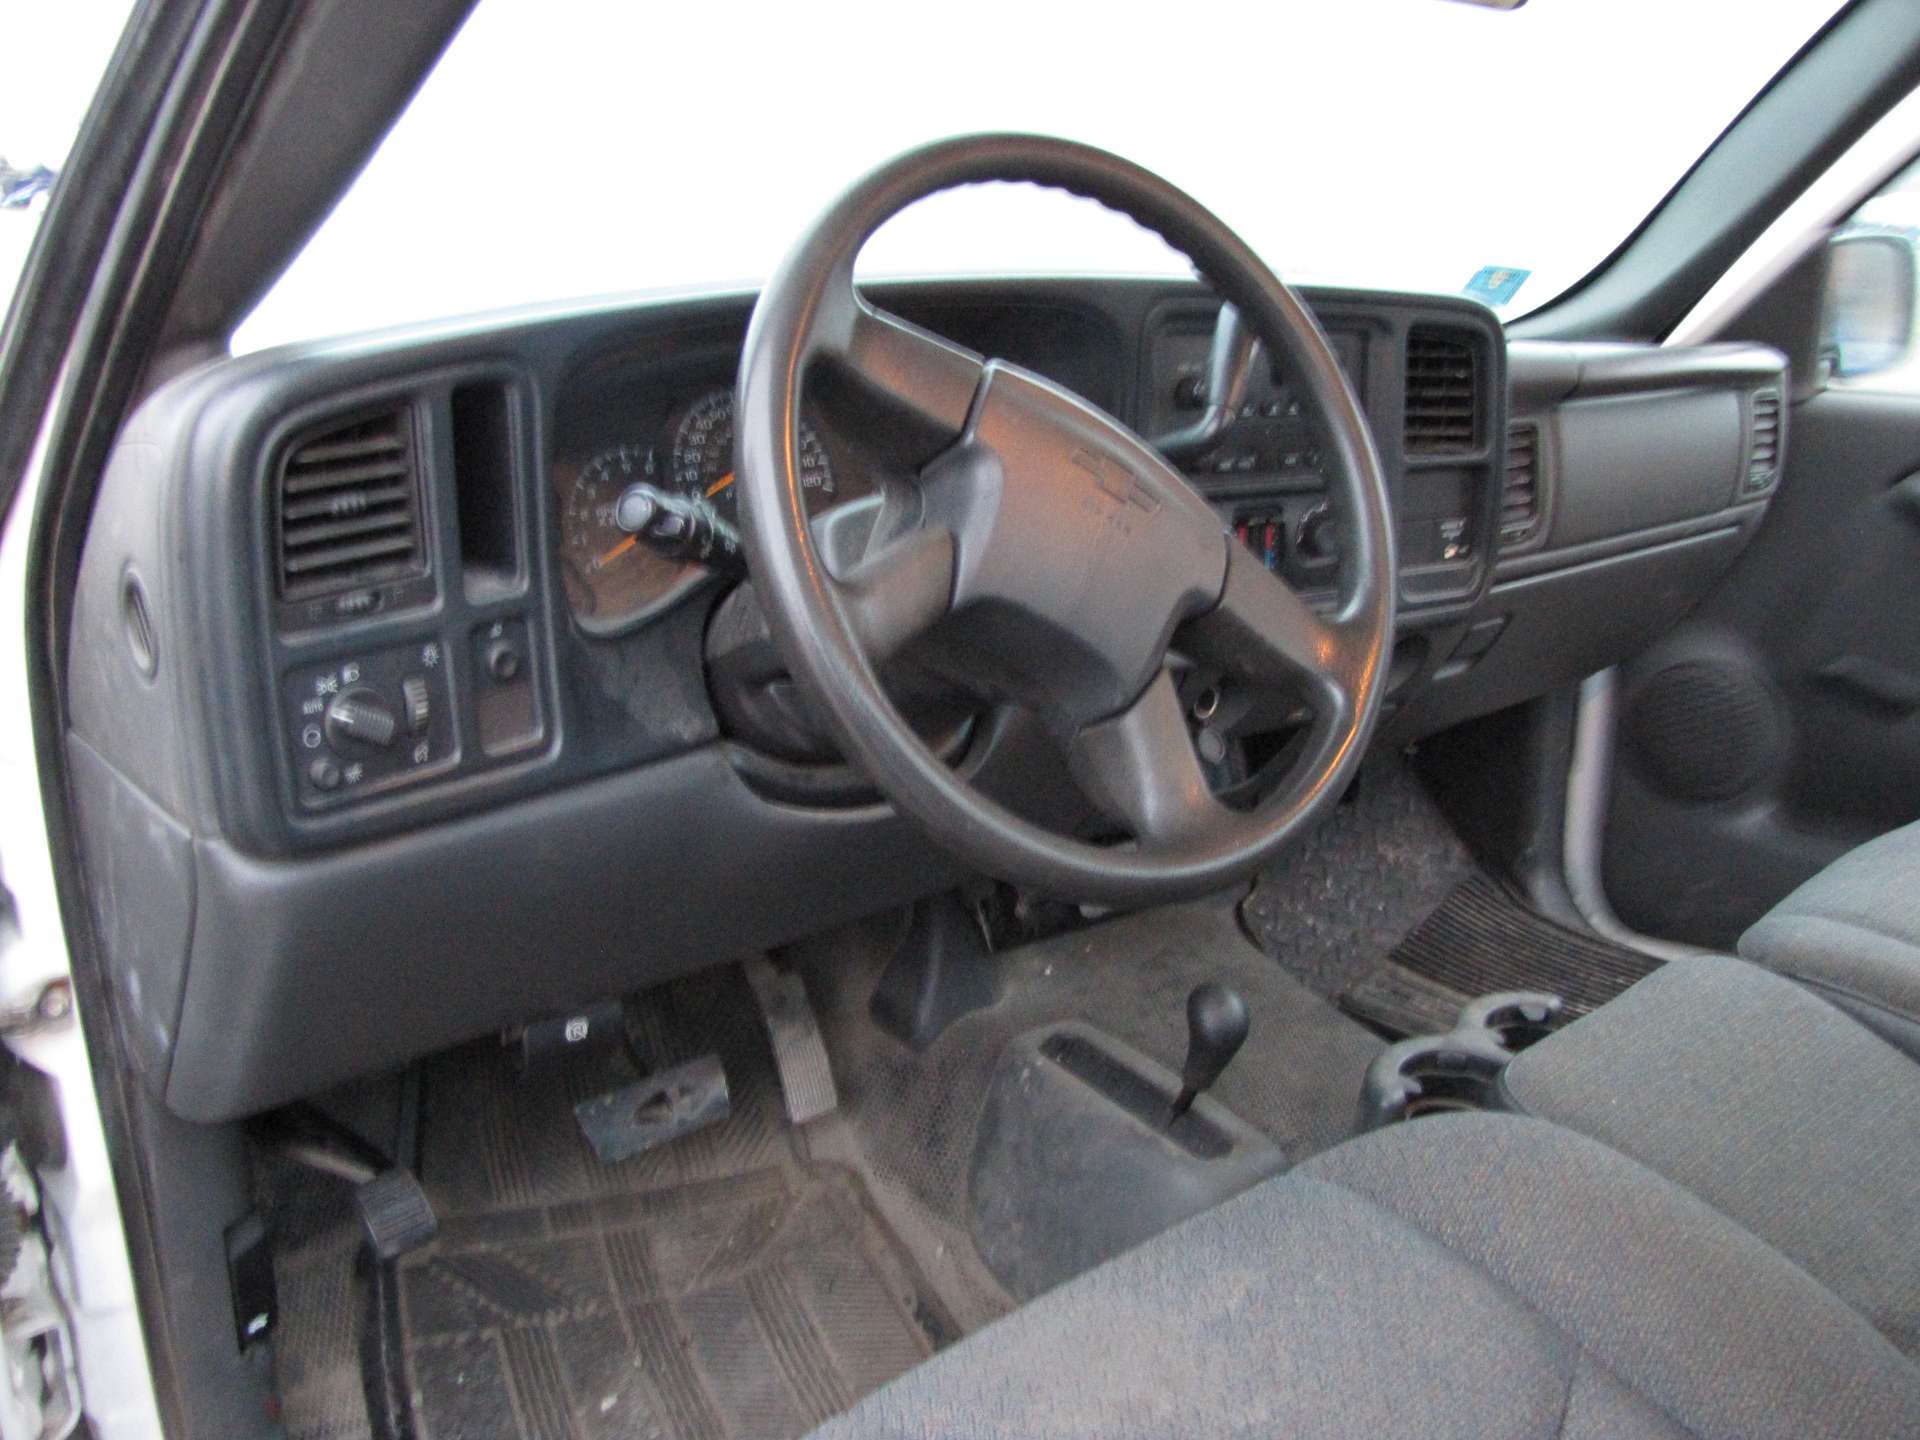 2006 Chevy 2500 HD pickup truck - Image 58 of 65